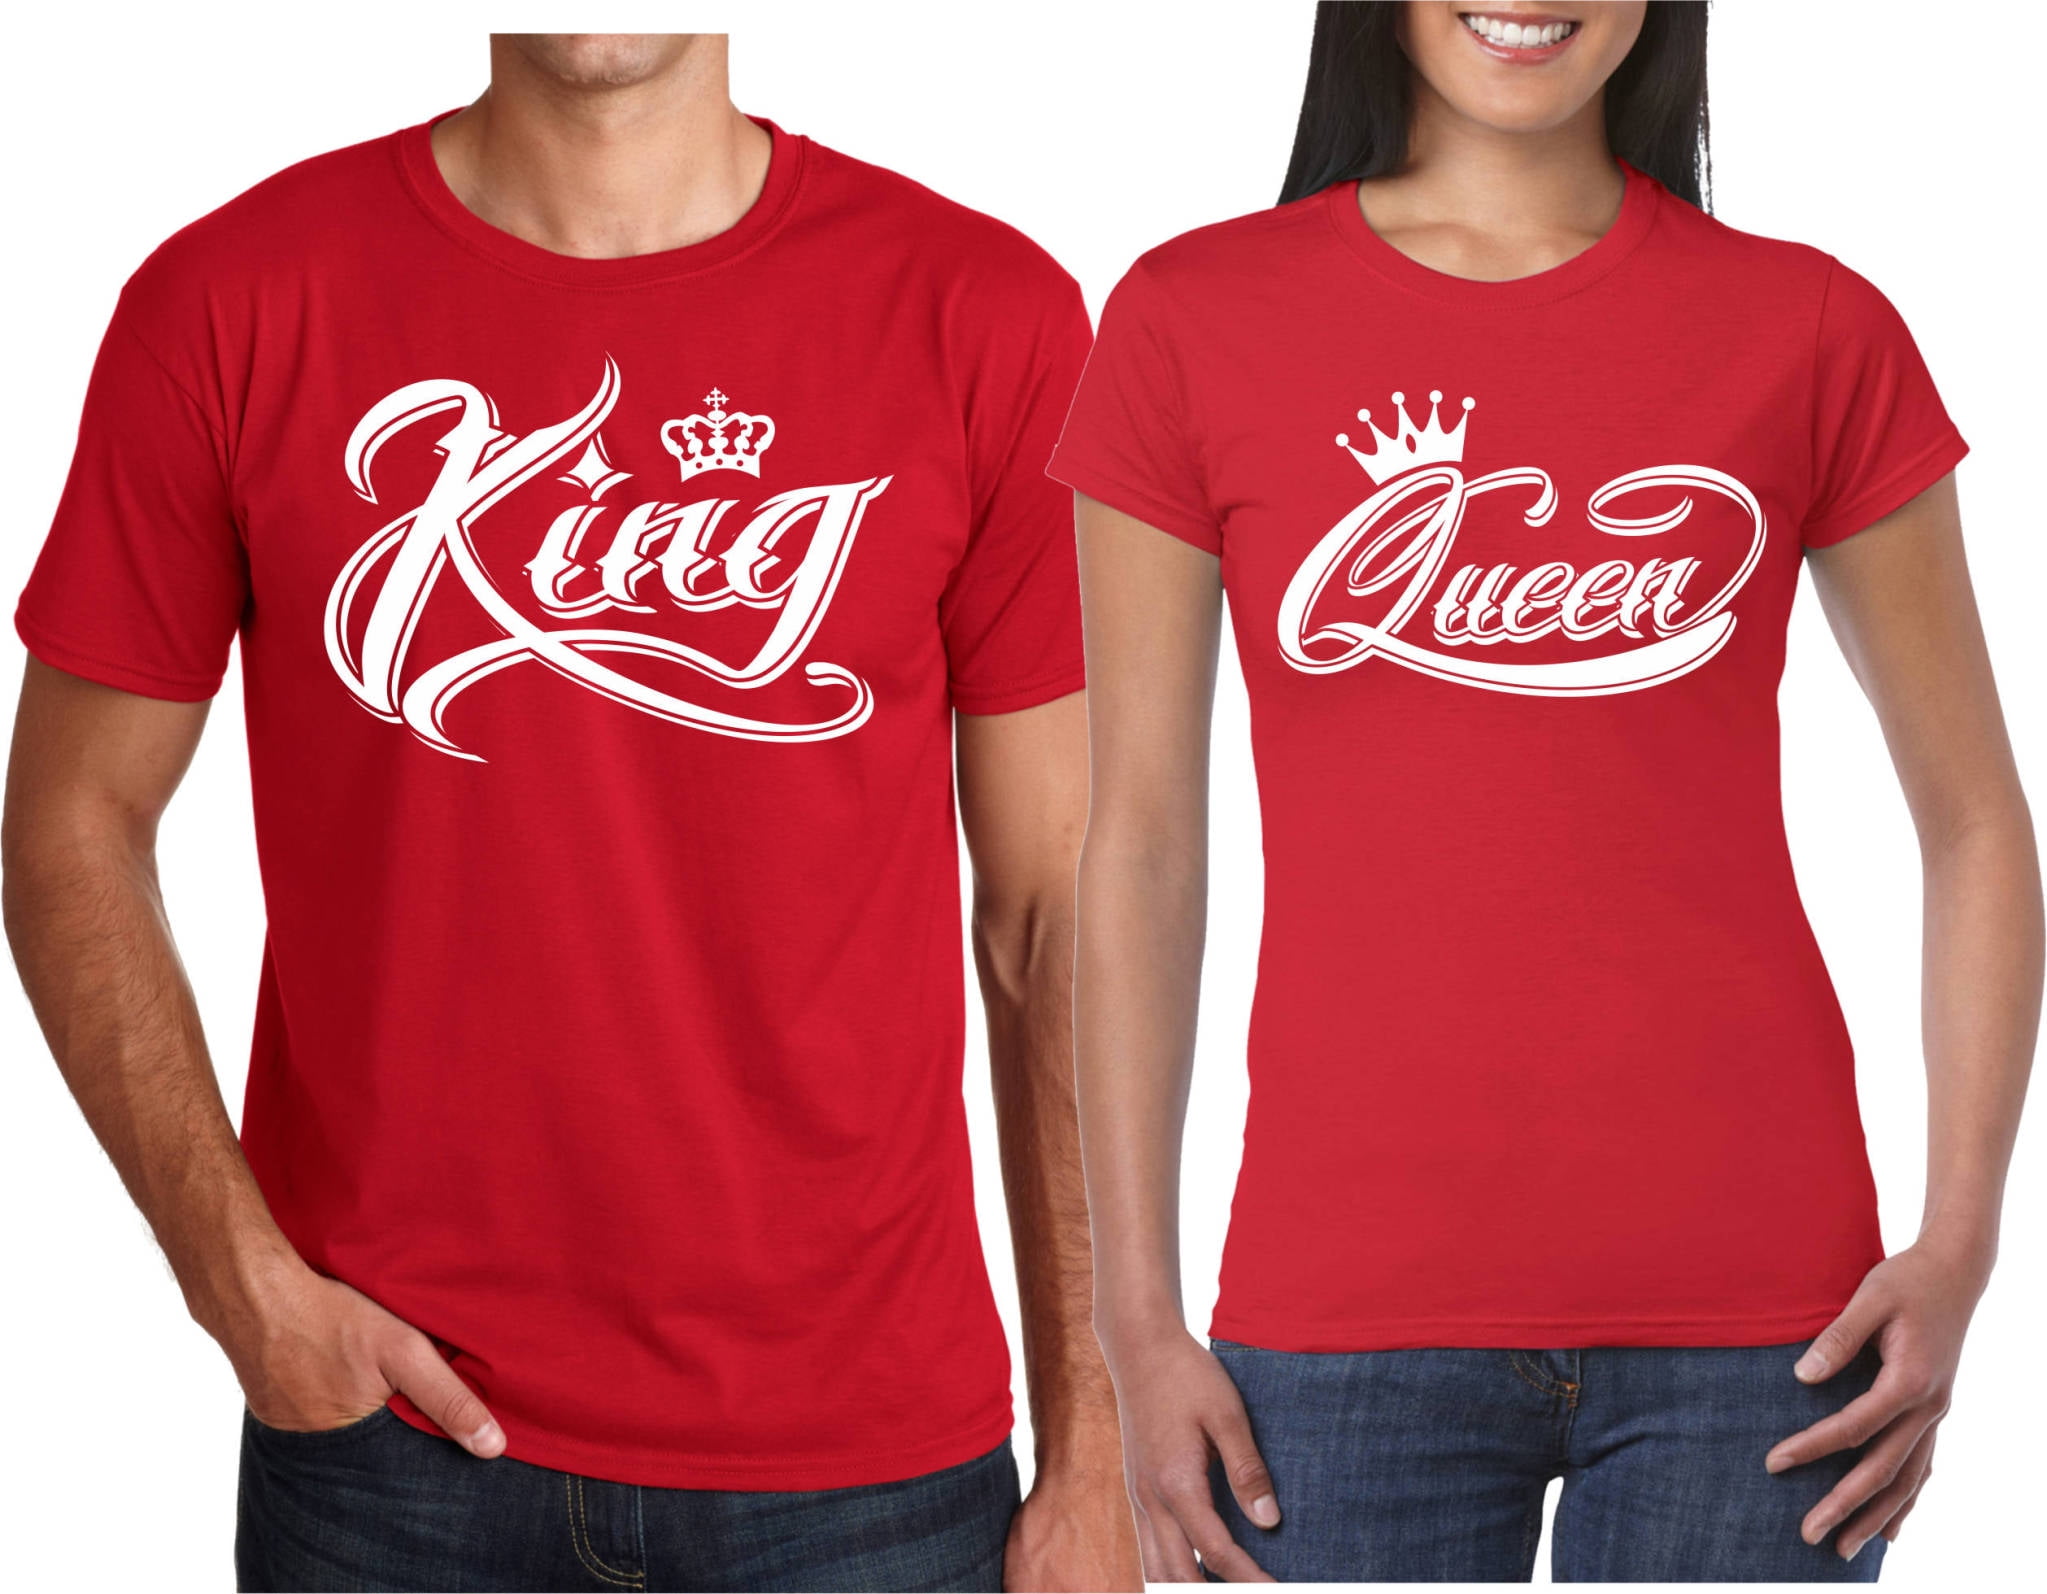 King & Queen Design Valentines Christmas Gift Couple Matching Cute T- Shirts Queen-Unisex-Red Walmart.com